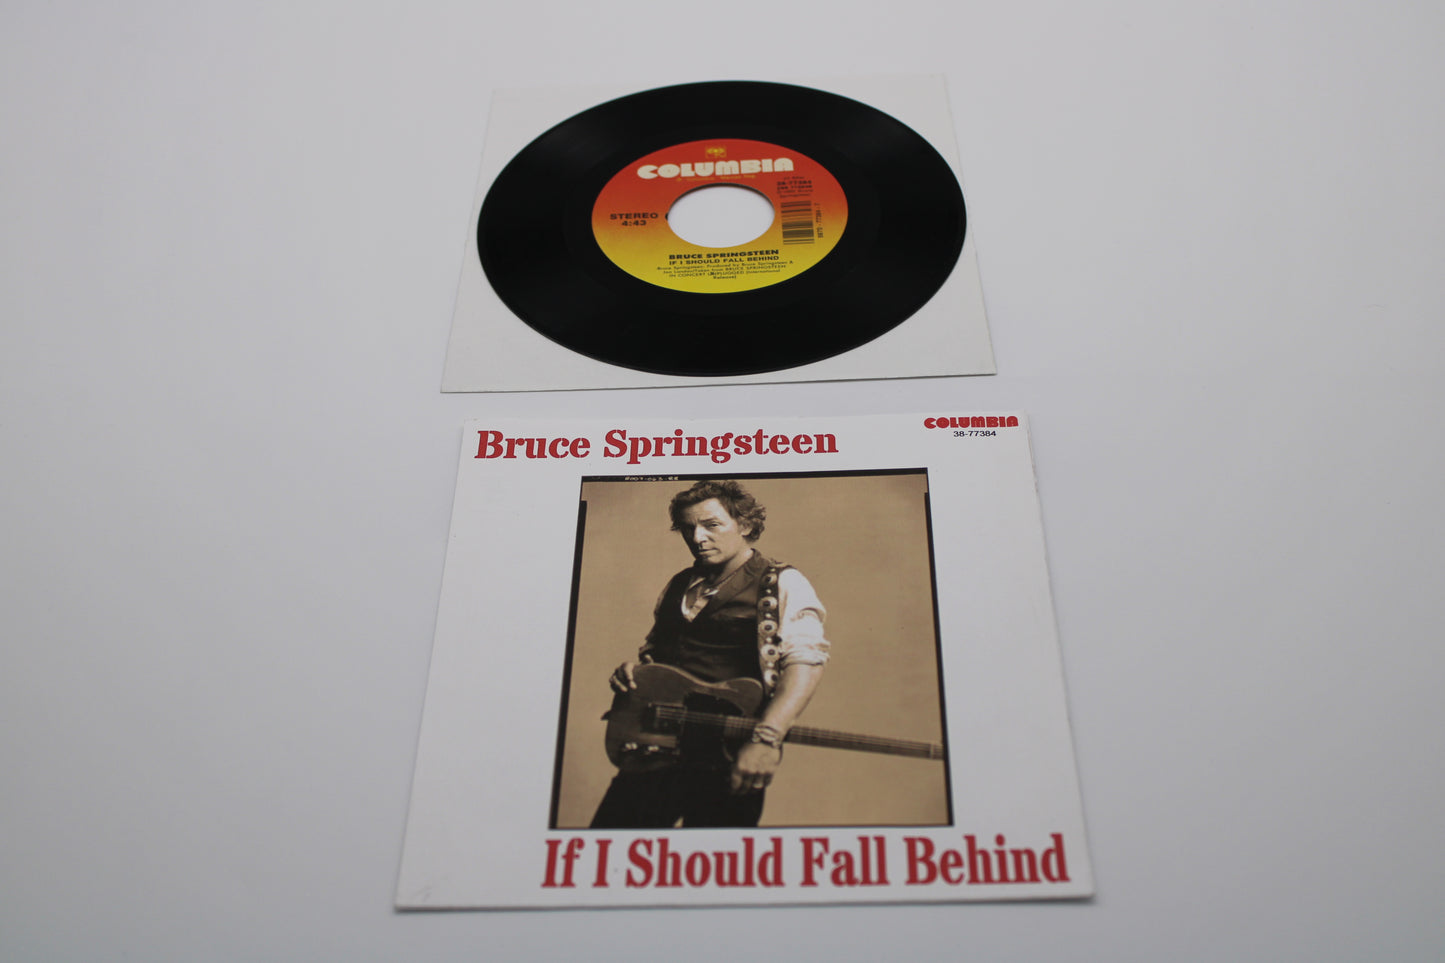 Bruce Springsteen Streets of Philadelphia with Rare Picture Sleeve - 45 record 1993